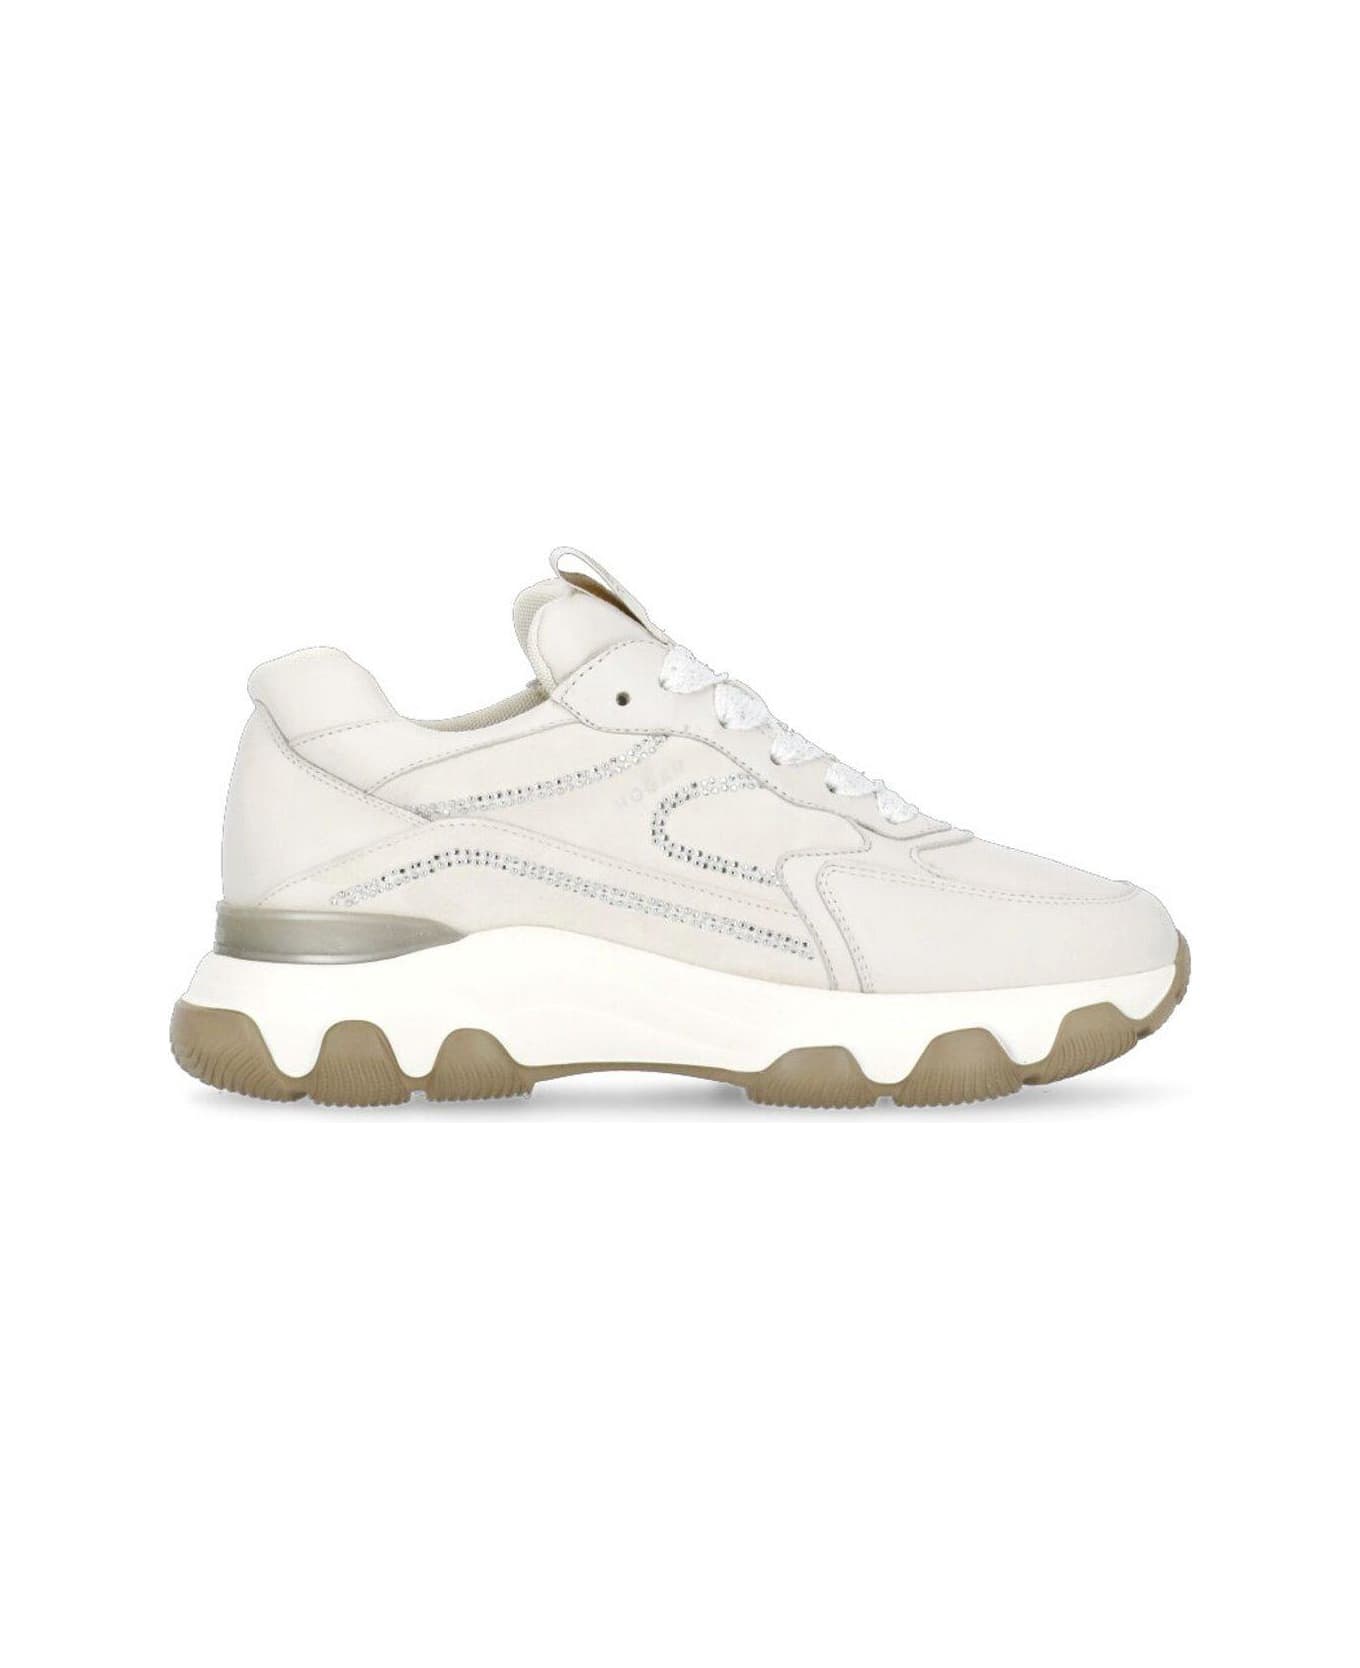 Hogan Round-toe Lace-up Sneakers - Ivory